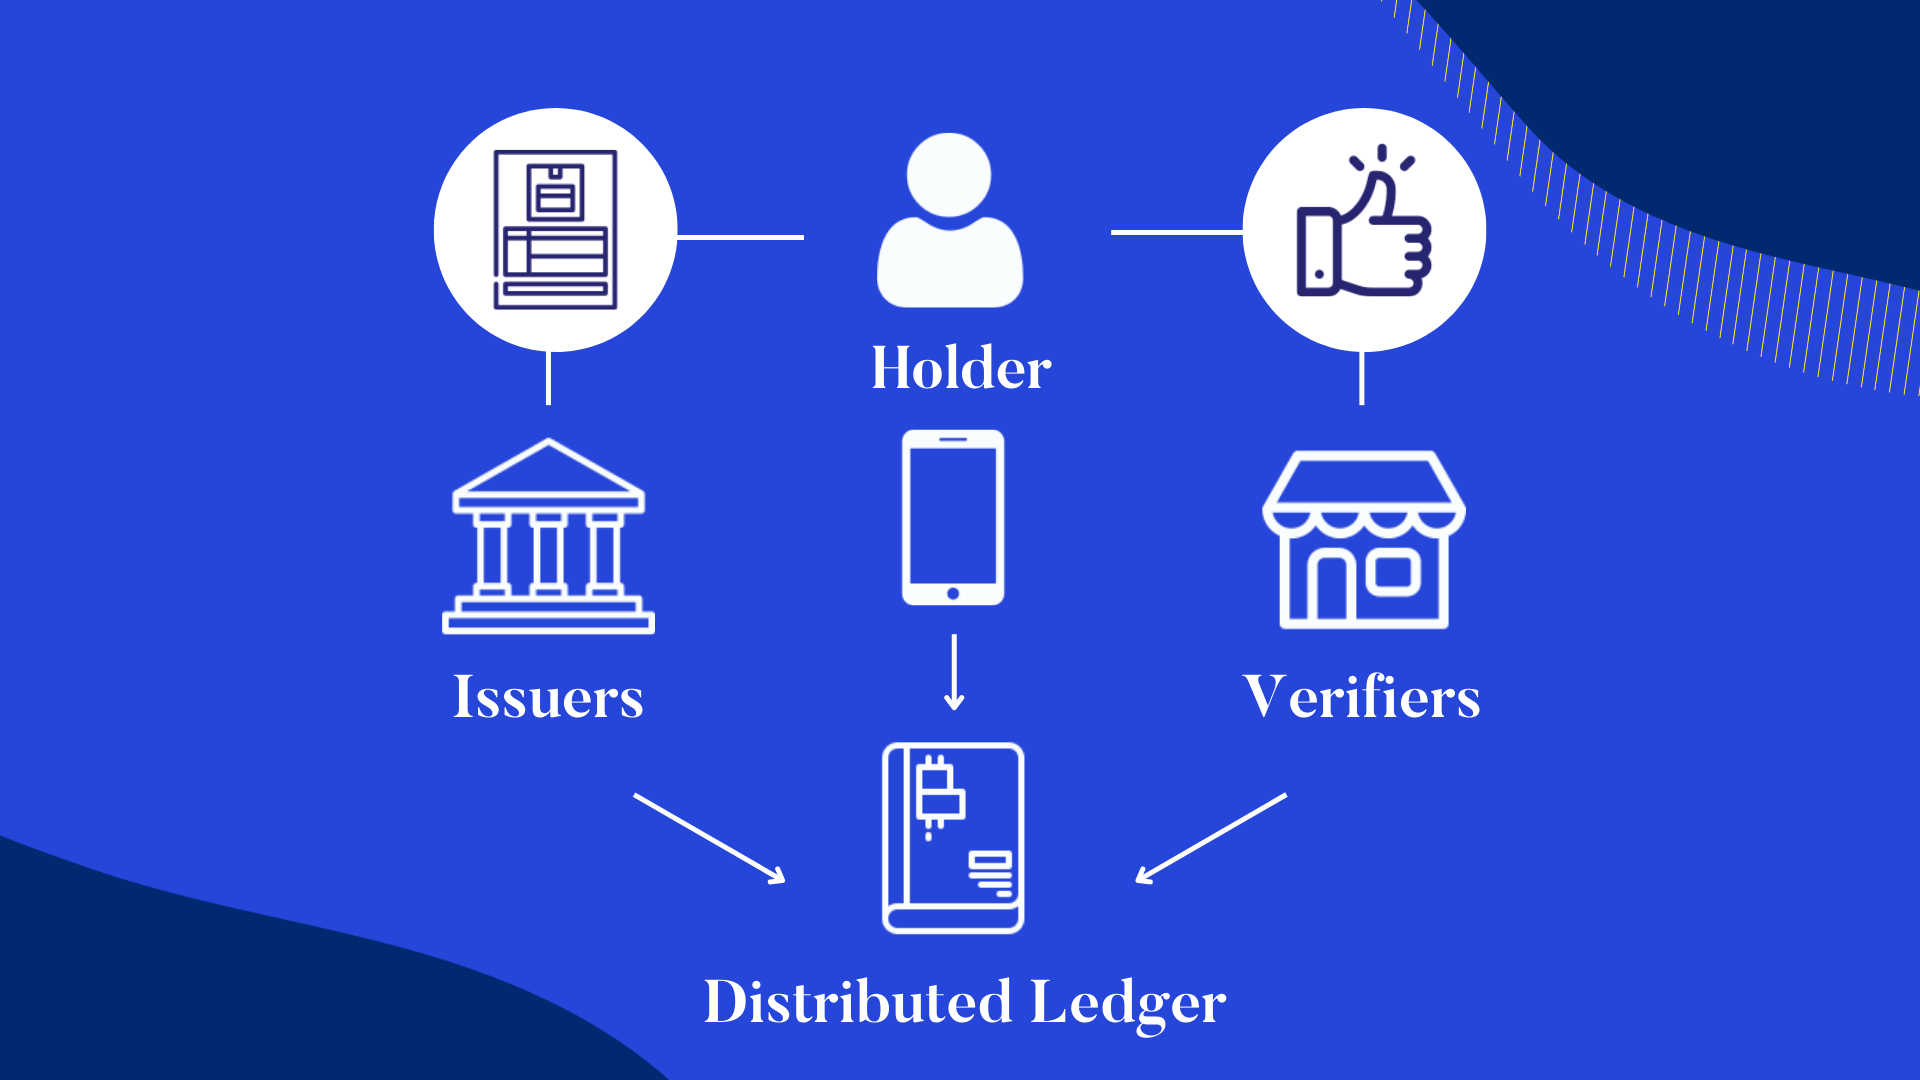 How Verfiable Credentials Work. Issuers provide credentials to both the holder and on the distributed ledger. When someone wants to verify your credentials, it's as easy as using your digital wallet to pay at the checkout. You provide access and they get verification. 